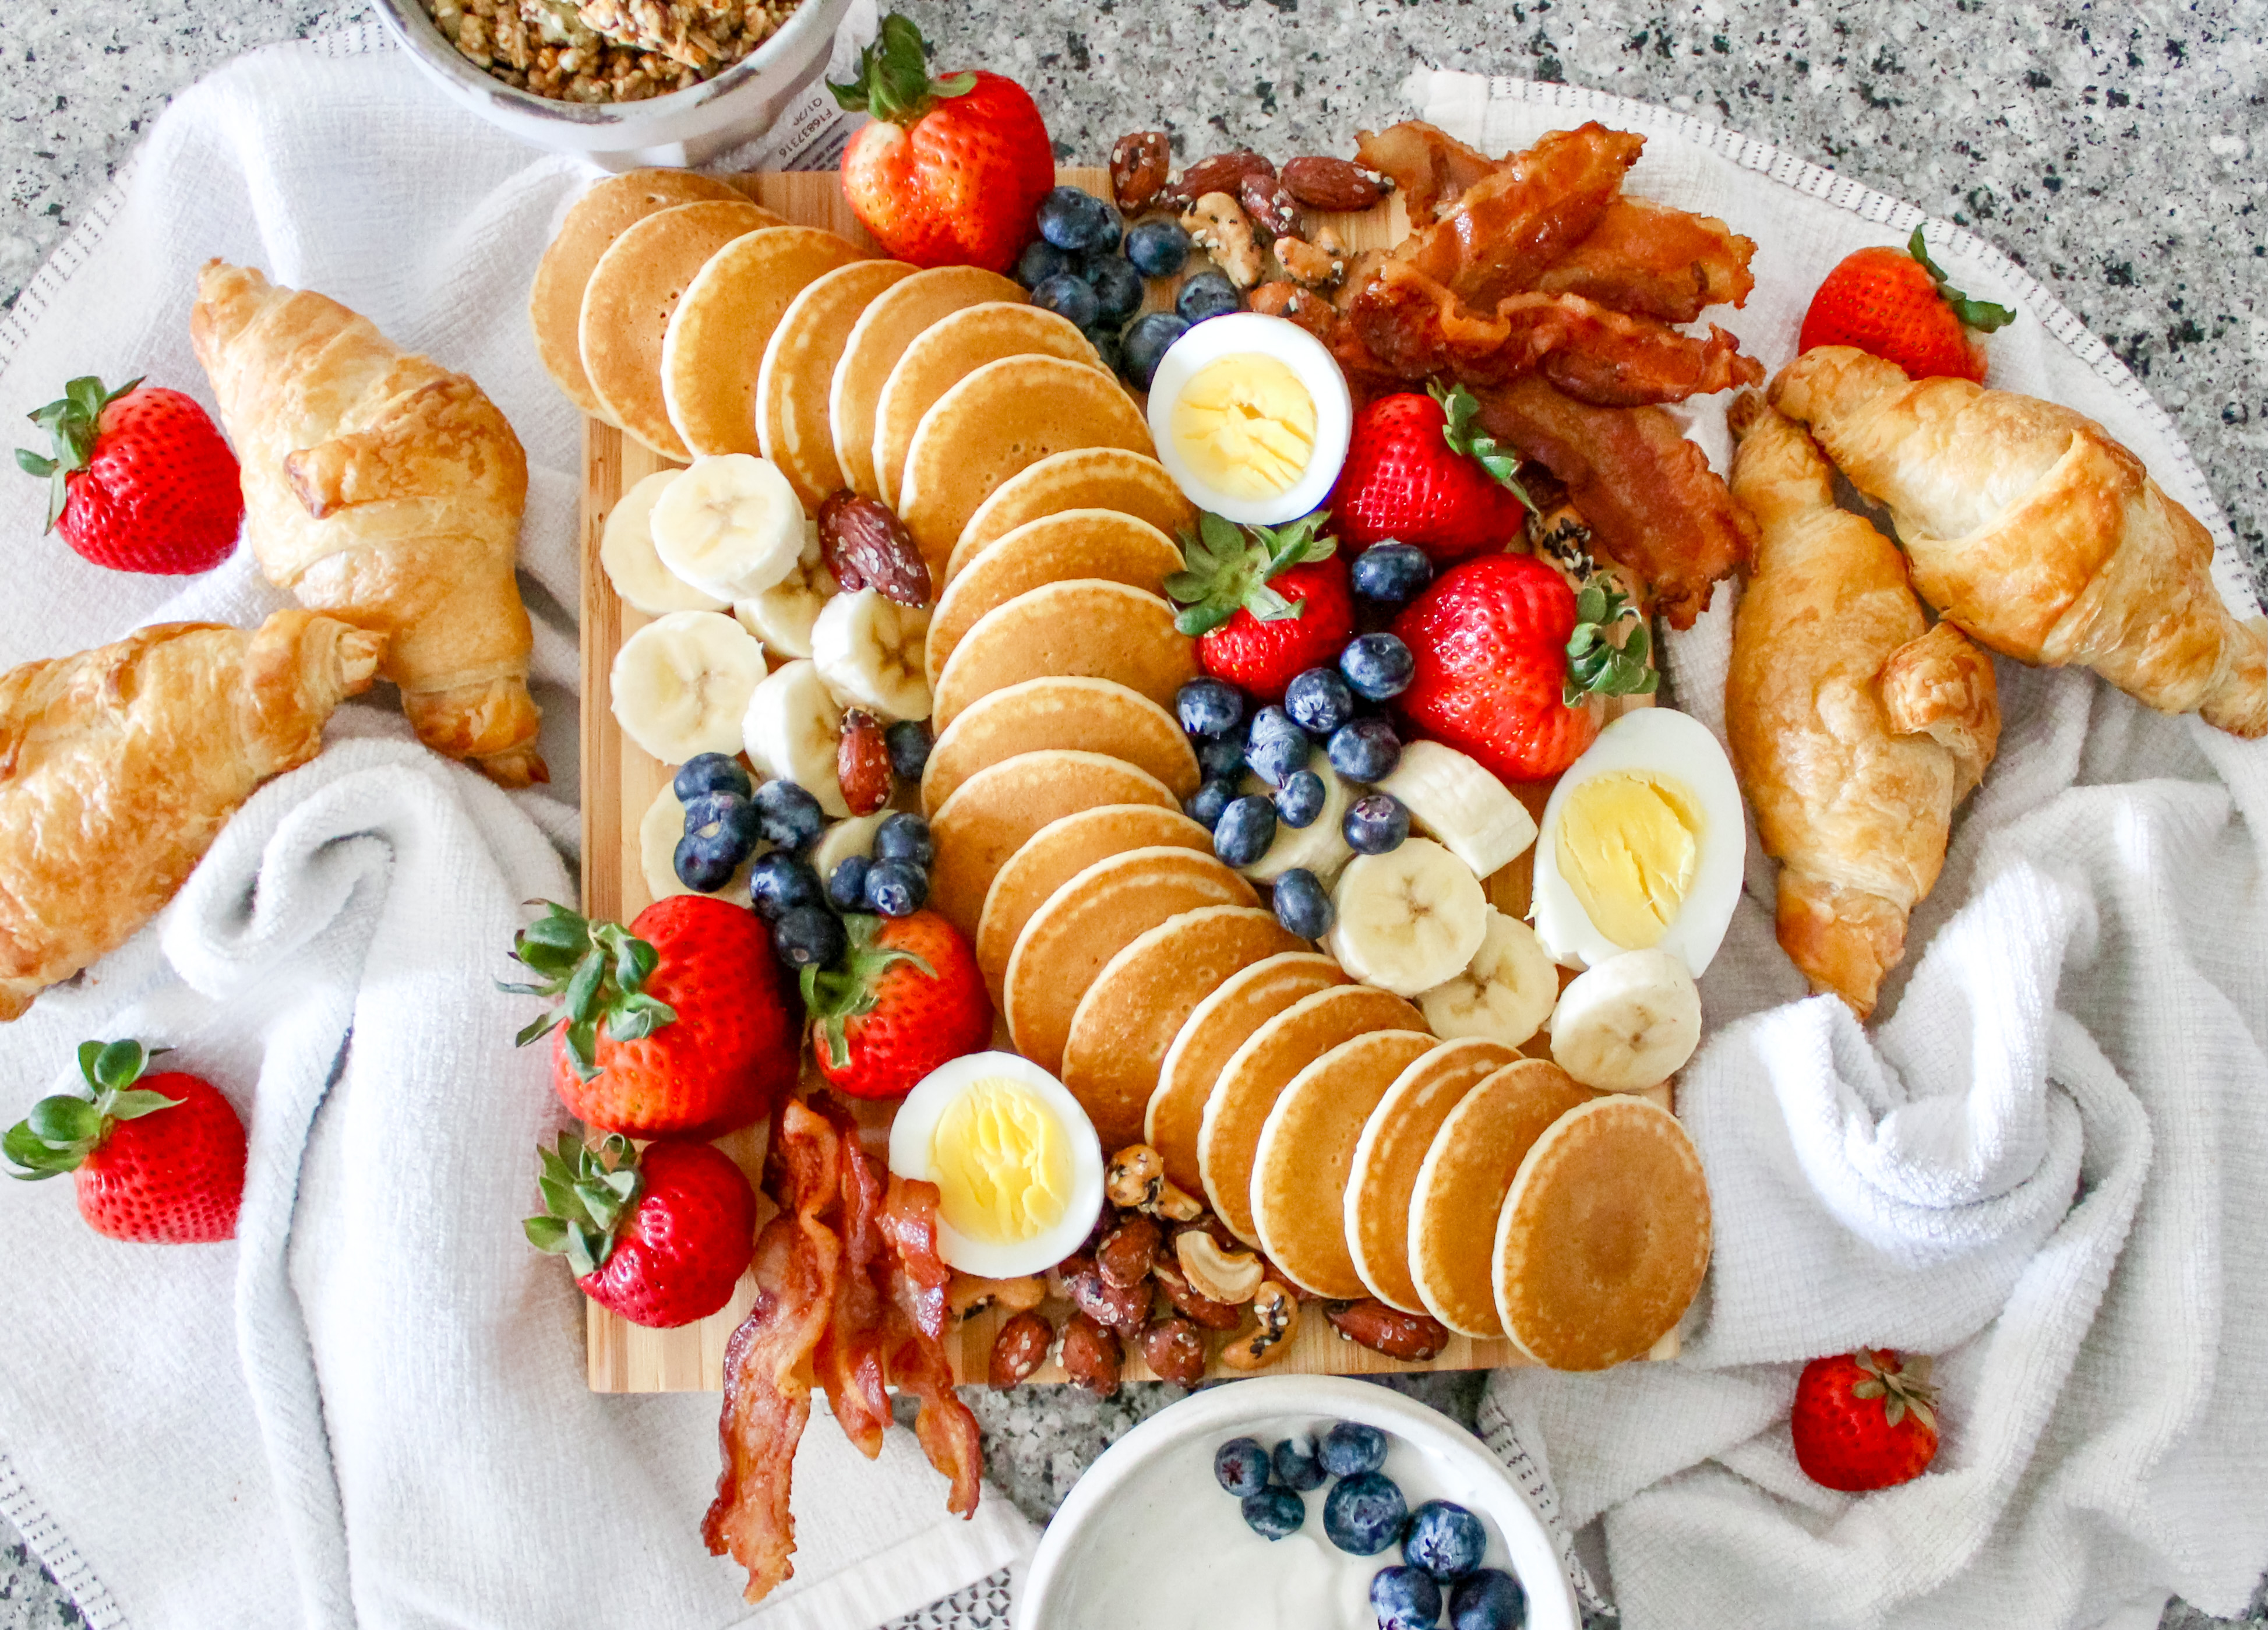 Easy Brunch Ideas For A Graduation Party